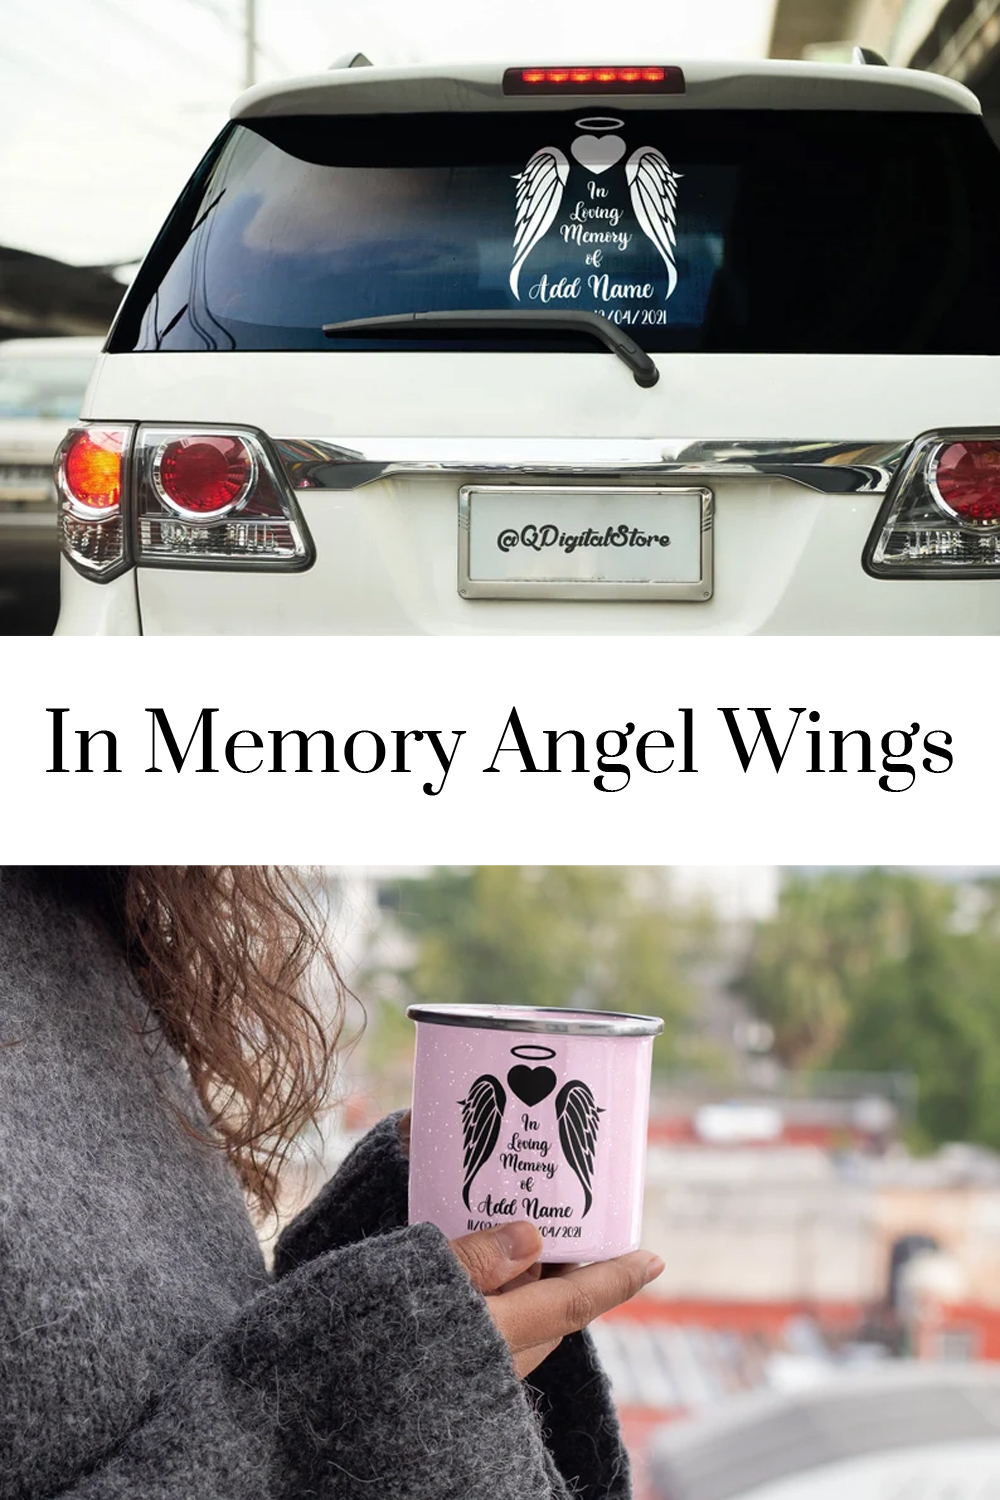 Cool images of angel wings to use.